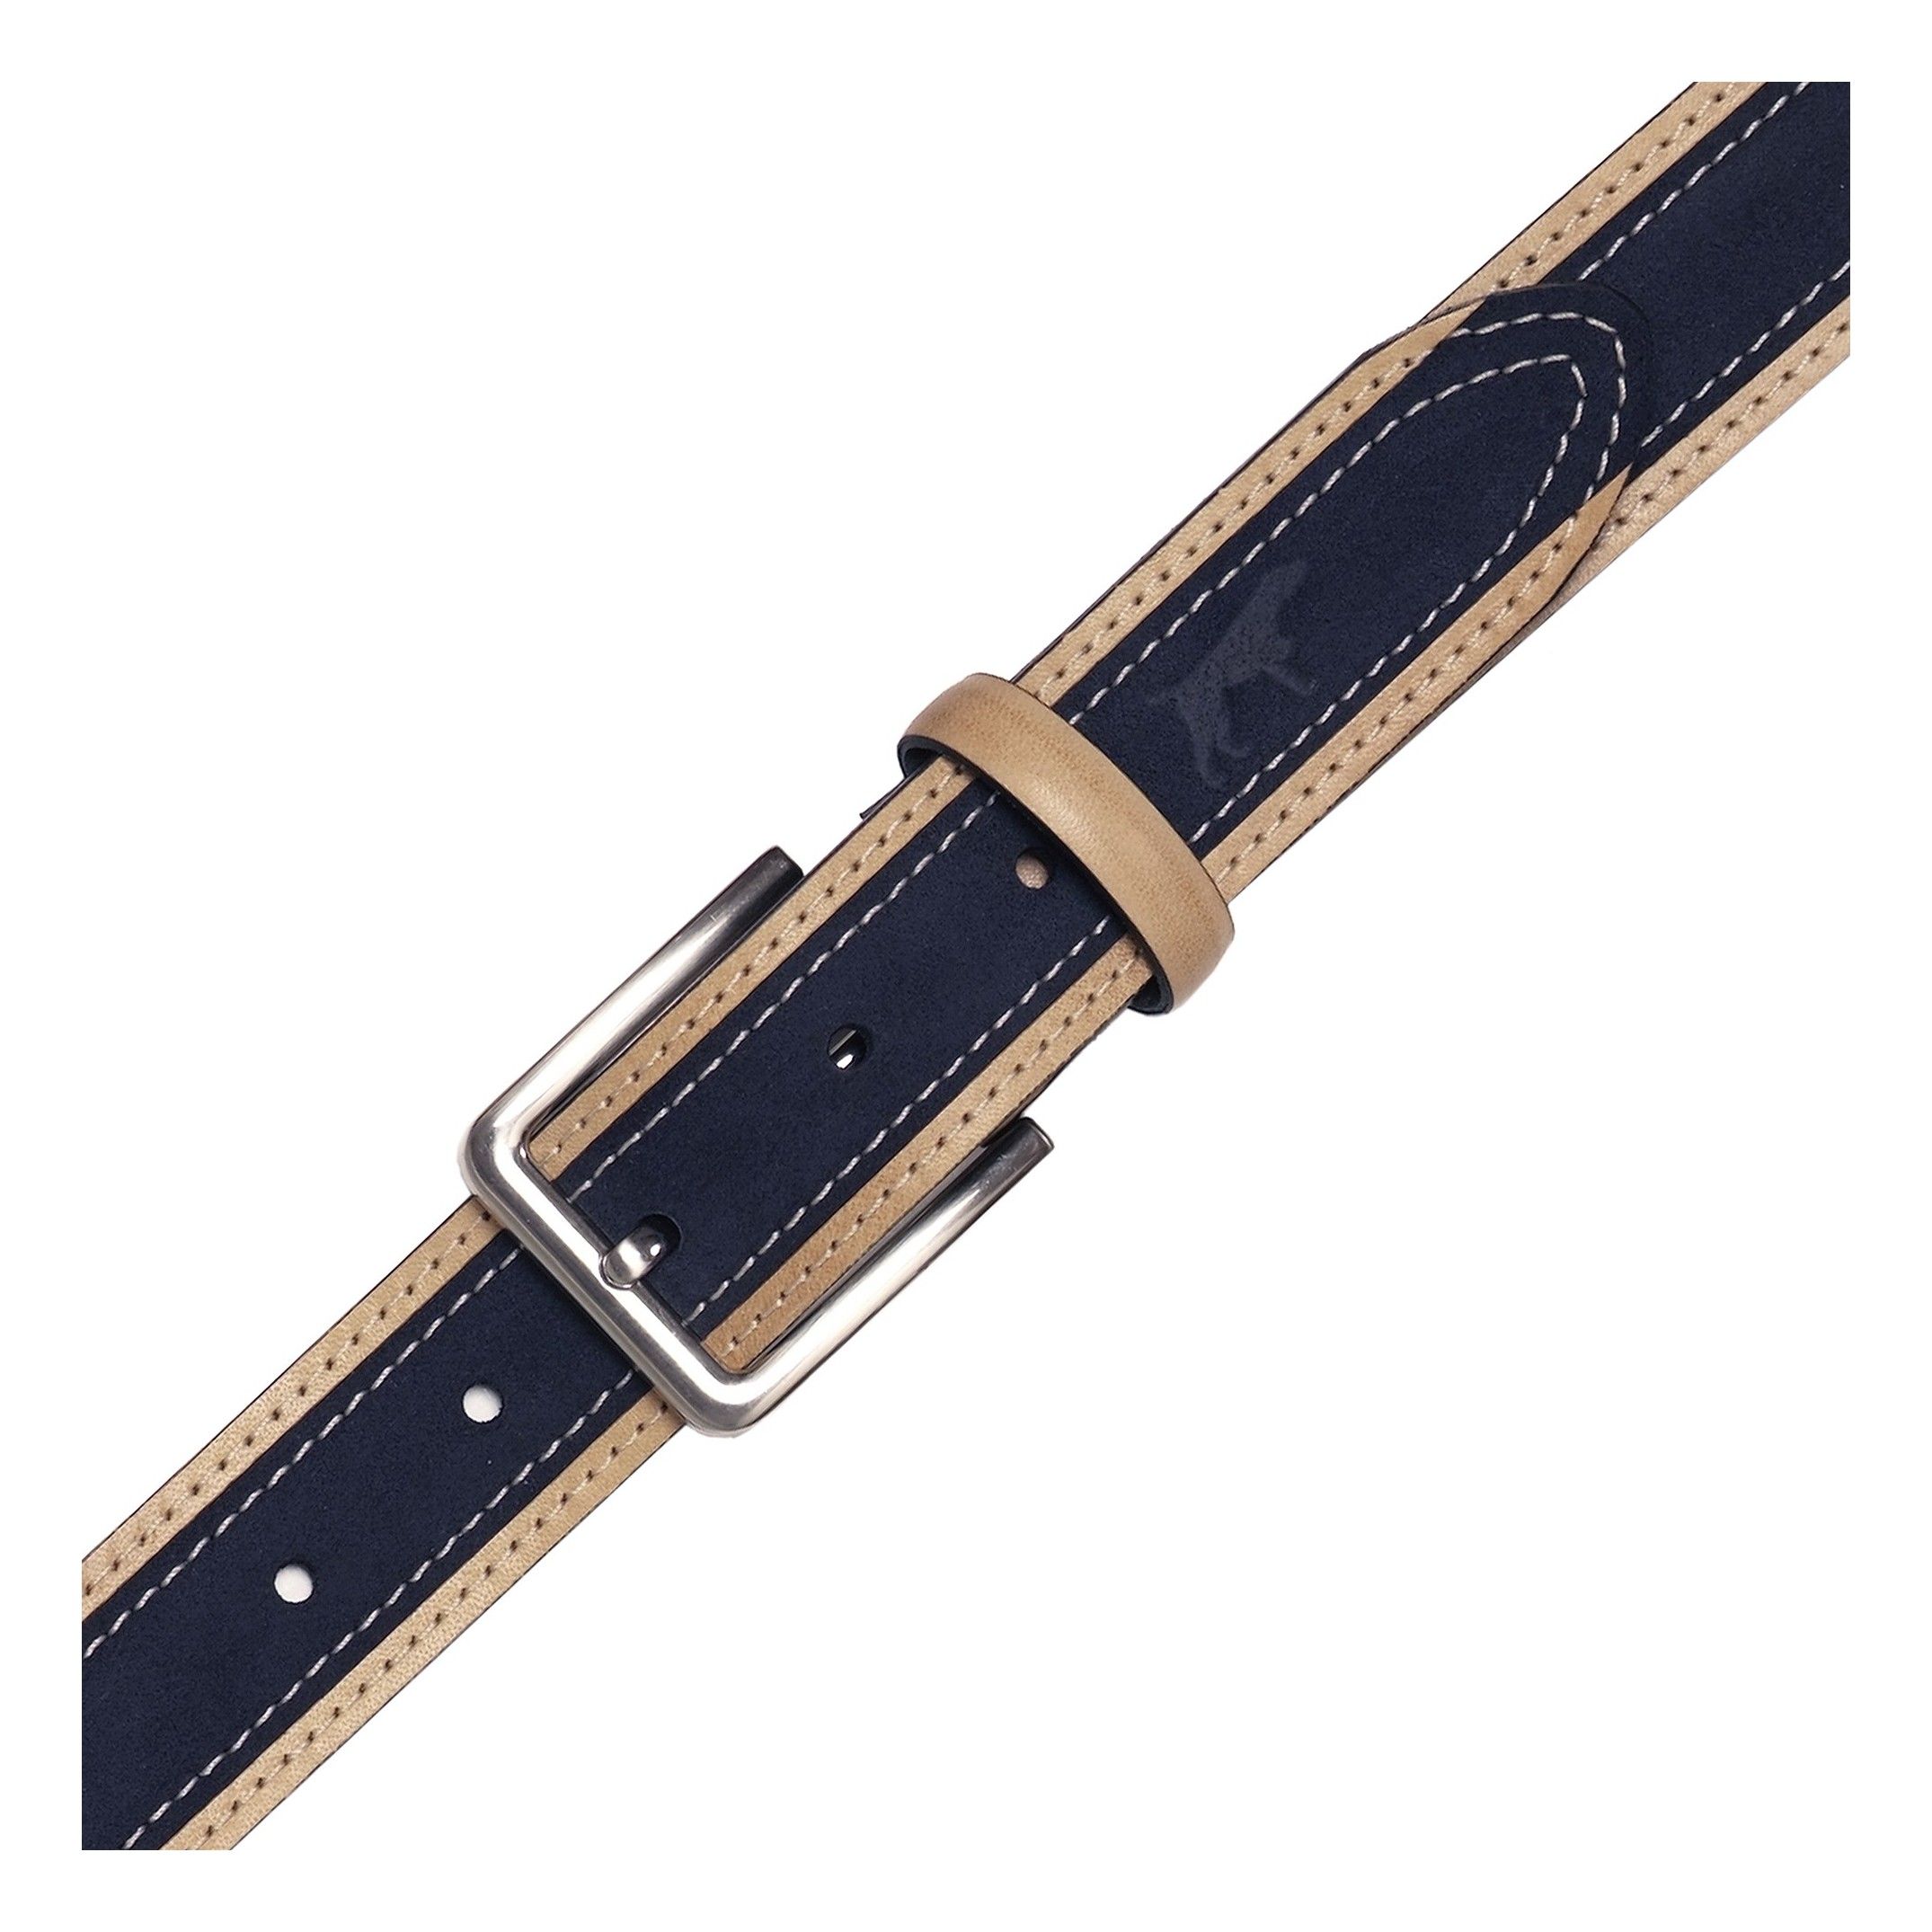 Adjustable belt. Classic leather. Removable metal buckle to adapt the belt. Width of 3,5 cm. Large of 100 cm & 115 cm. Navy color. Classic style.